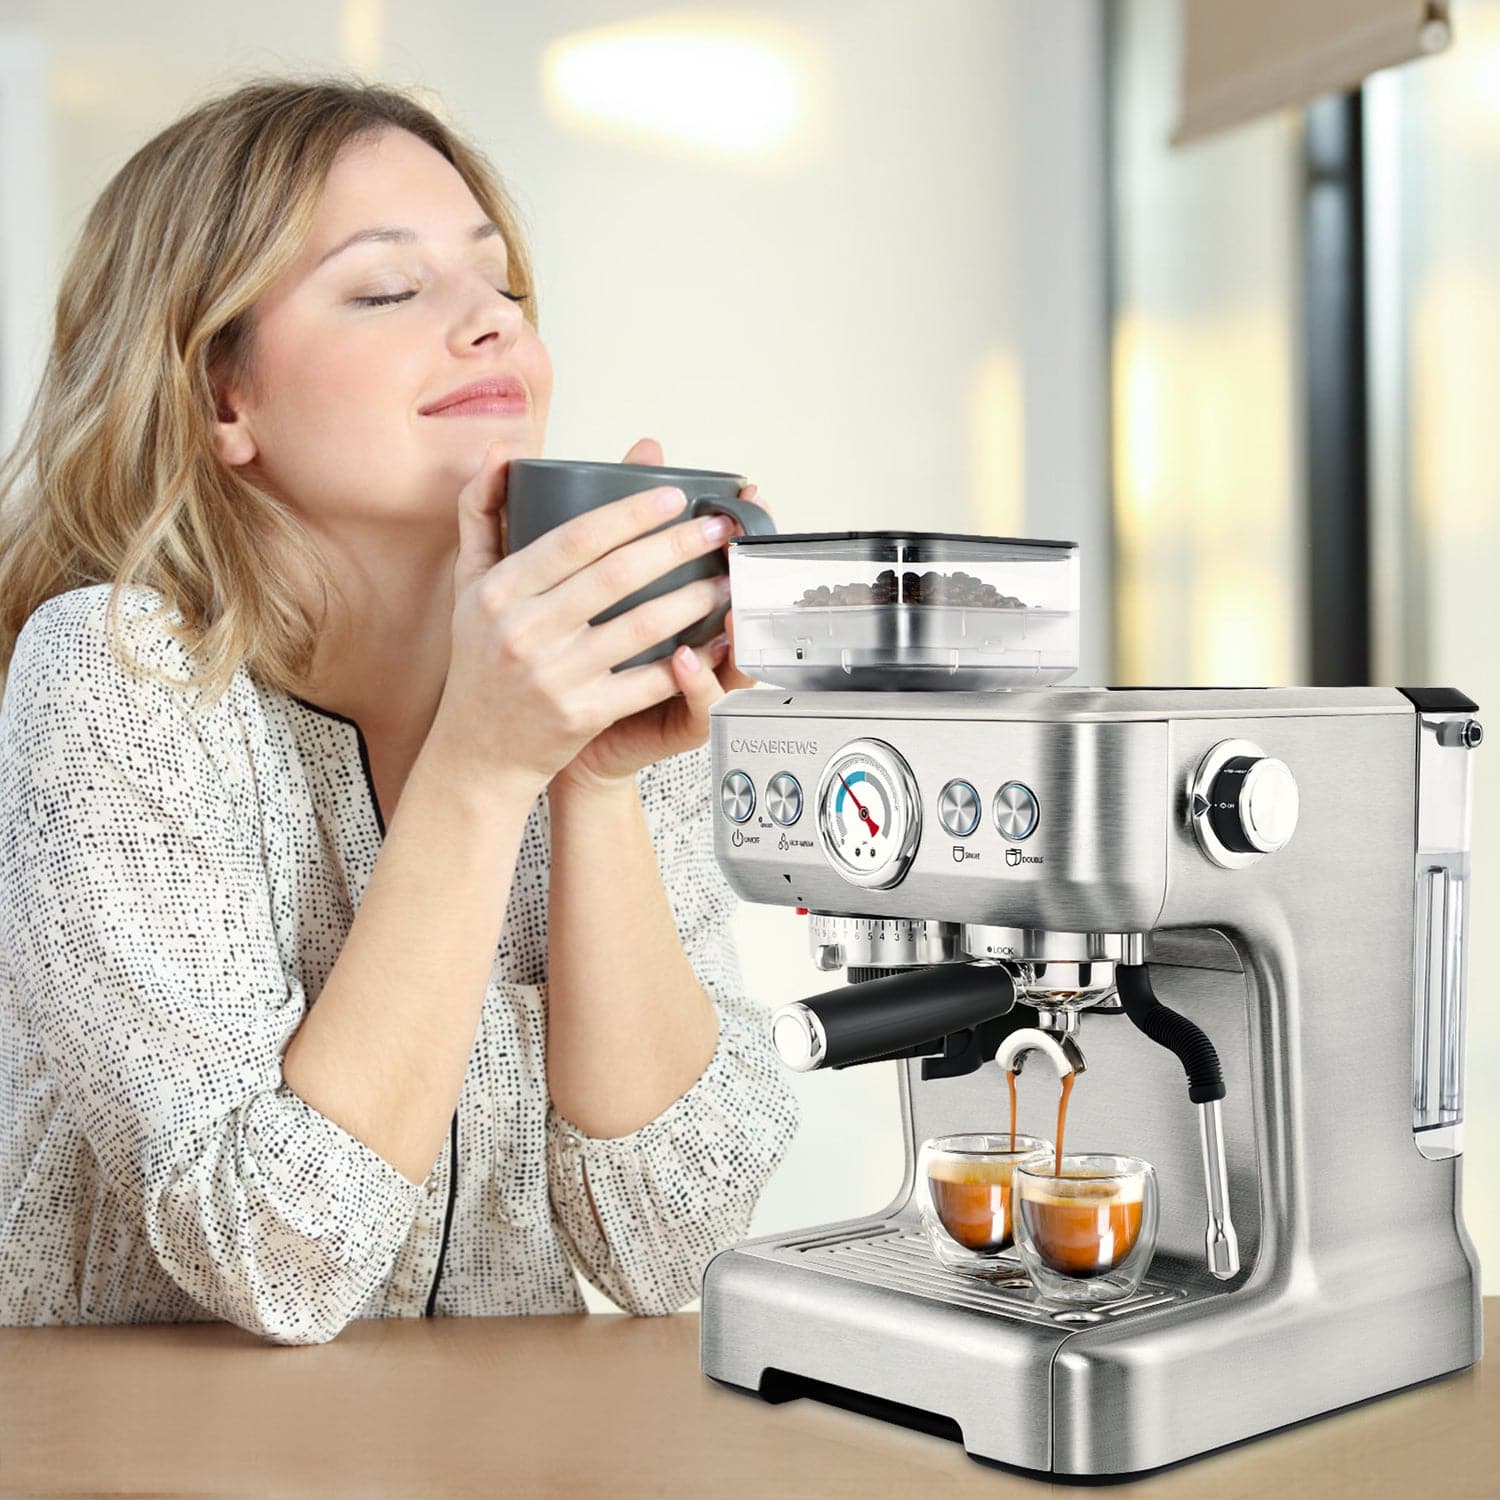 Casabrews 5700Gense™ All-in-One Espresso Machine with Grinding Memory Function